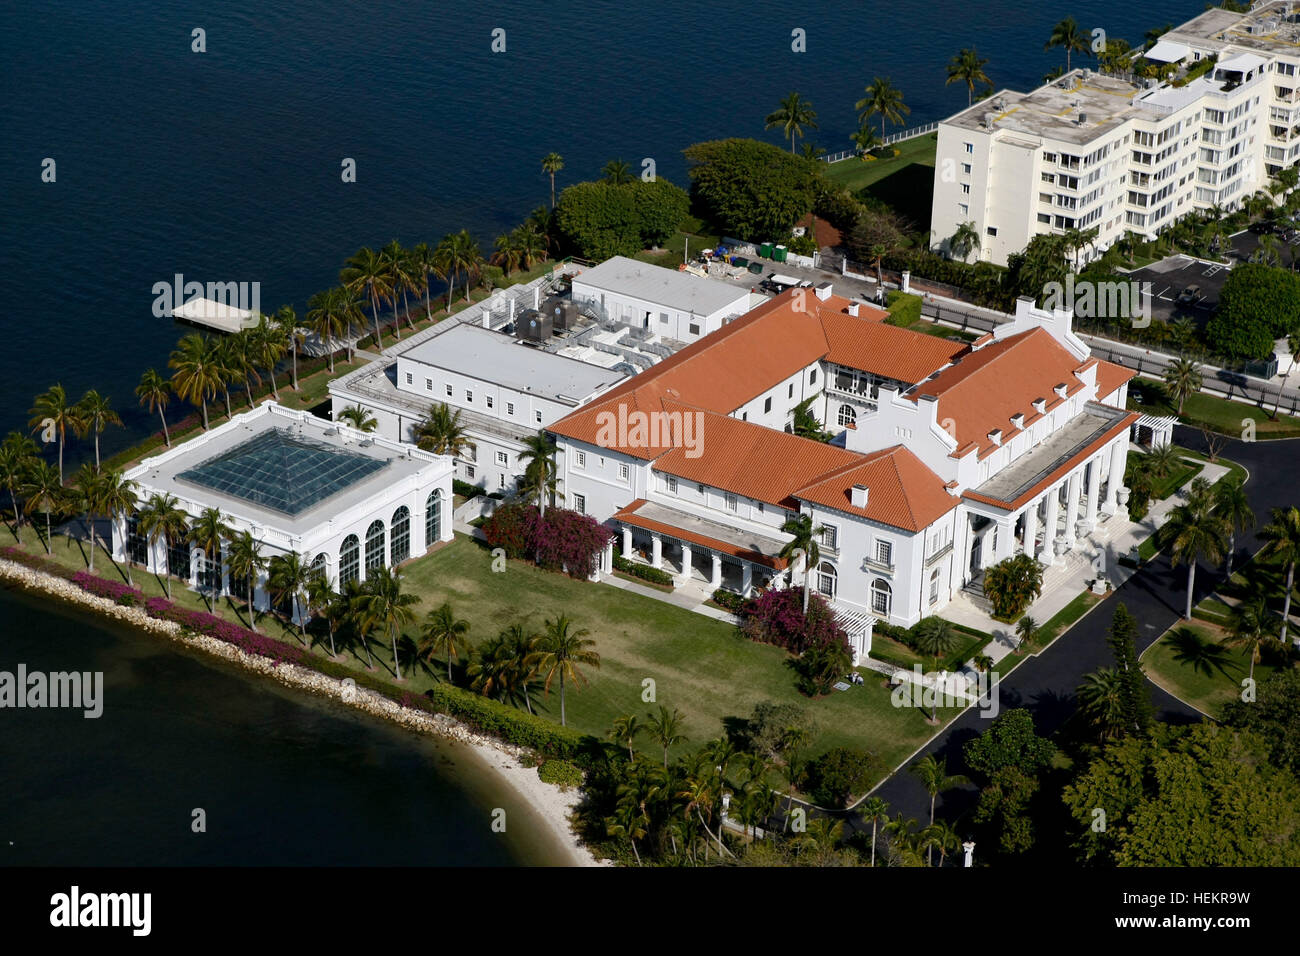 Palm Beach, Florida, USA. 23rd Dec, 2016. 022709 FH PB estates aerials photo by Richard Graulich/The Palm Beach Post 0061617A - PALM BEACH - Florida Home and Jan Tuckwood history book aerials of Palm Beach estates and misc. Whitehall: Blame it on his railroads, but where Henry Flagler and his vast fortune led, the rest of Mrs. Astor's 400 Gilded Age society members followed. And when he built his Beaux Arts mansion in Palm Beach in 1902, they eventually pursued that trend too. After visiting Flagler's hotels, many society guests bought land and built their own Palm Beach sandcastl Stock Photo